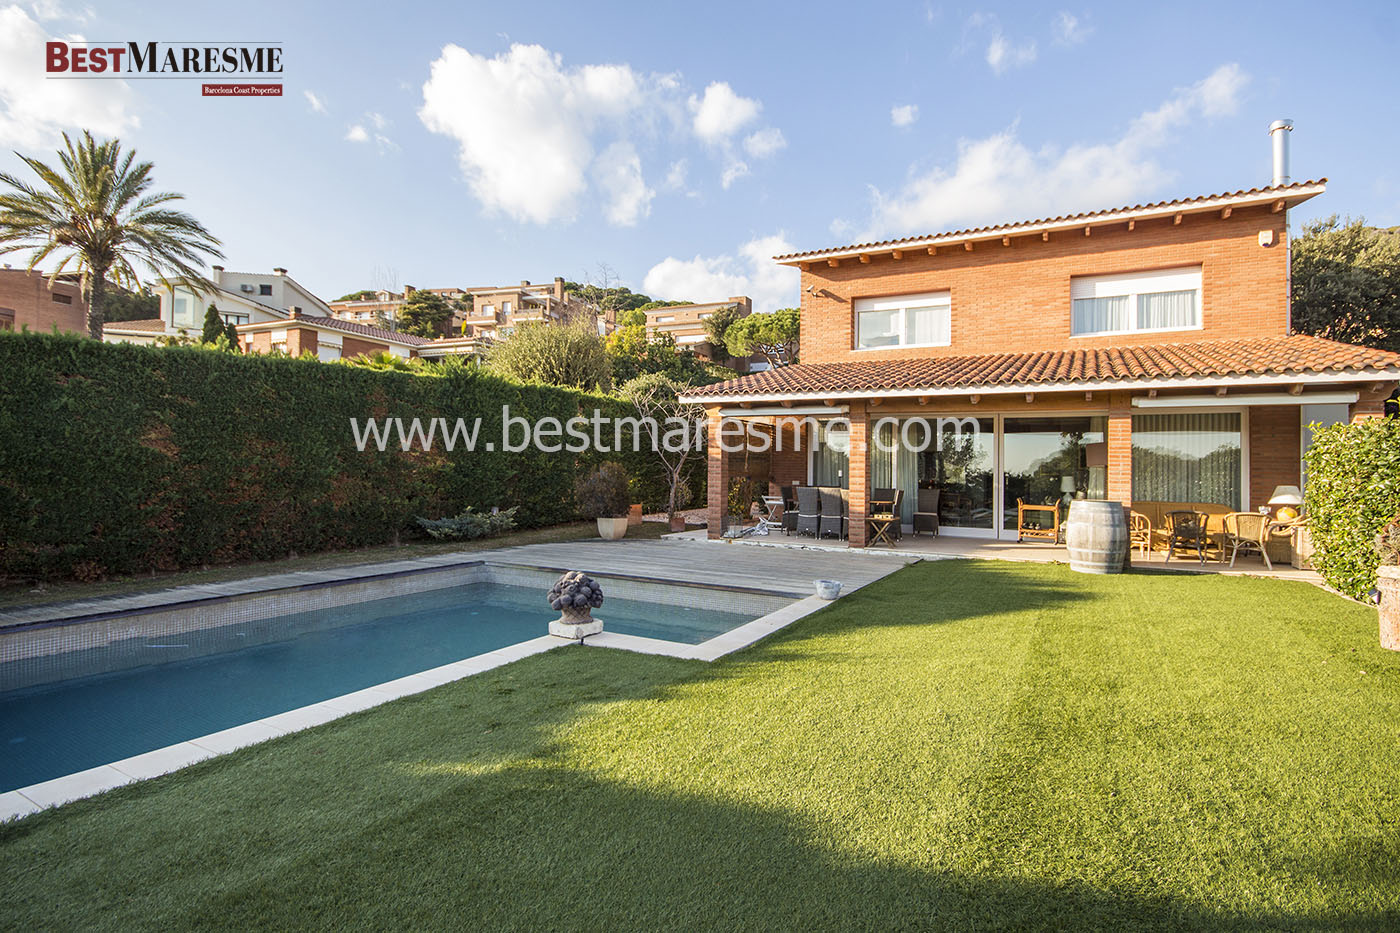 Exclusive residential area of Sant Berger